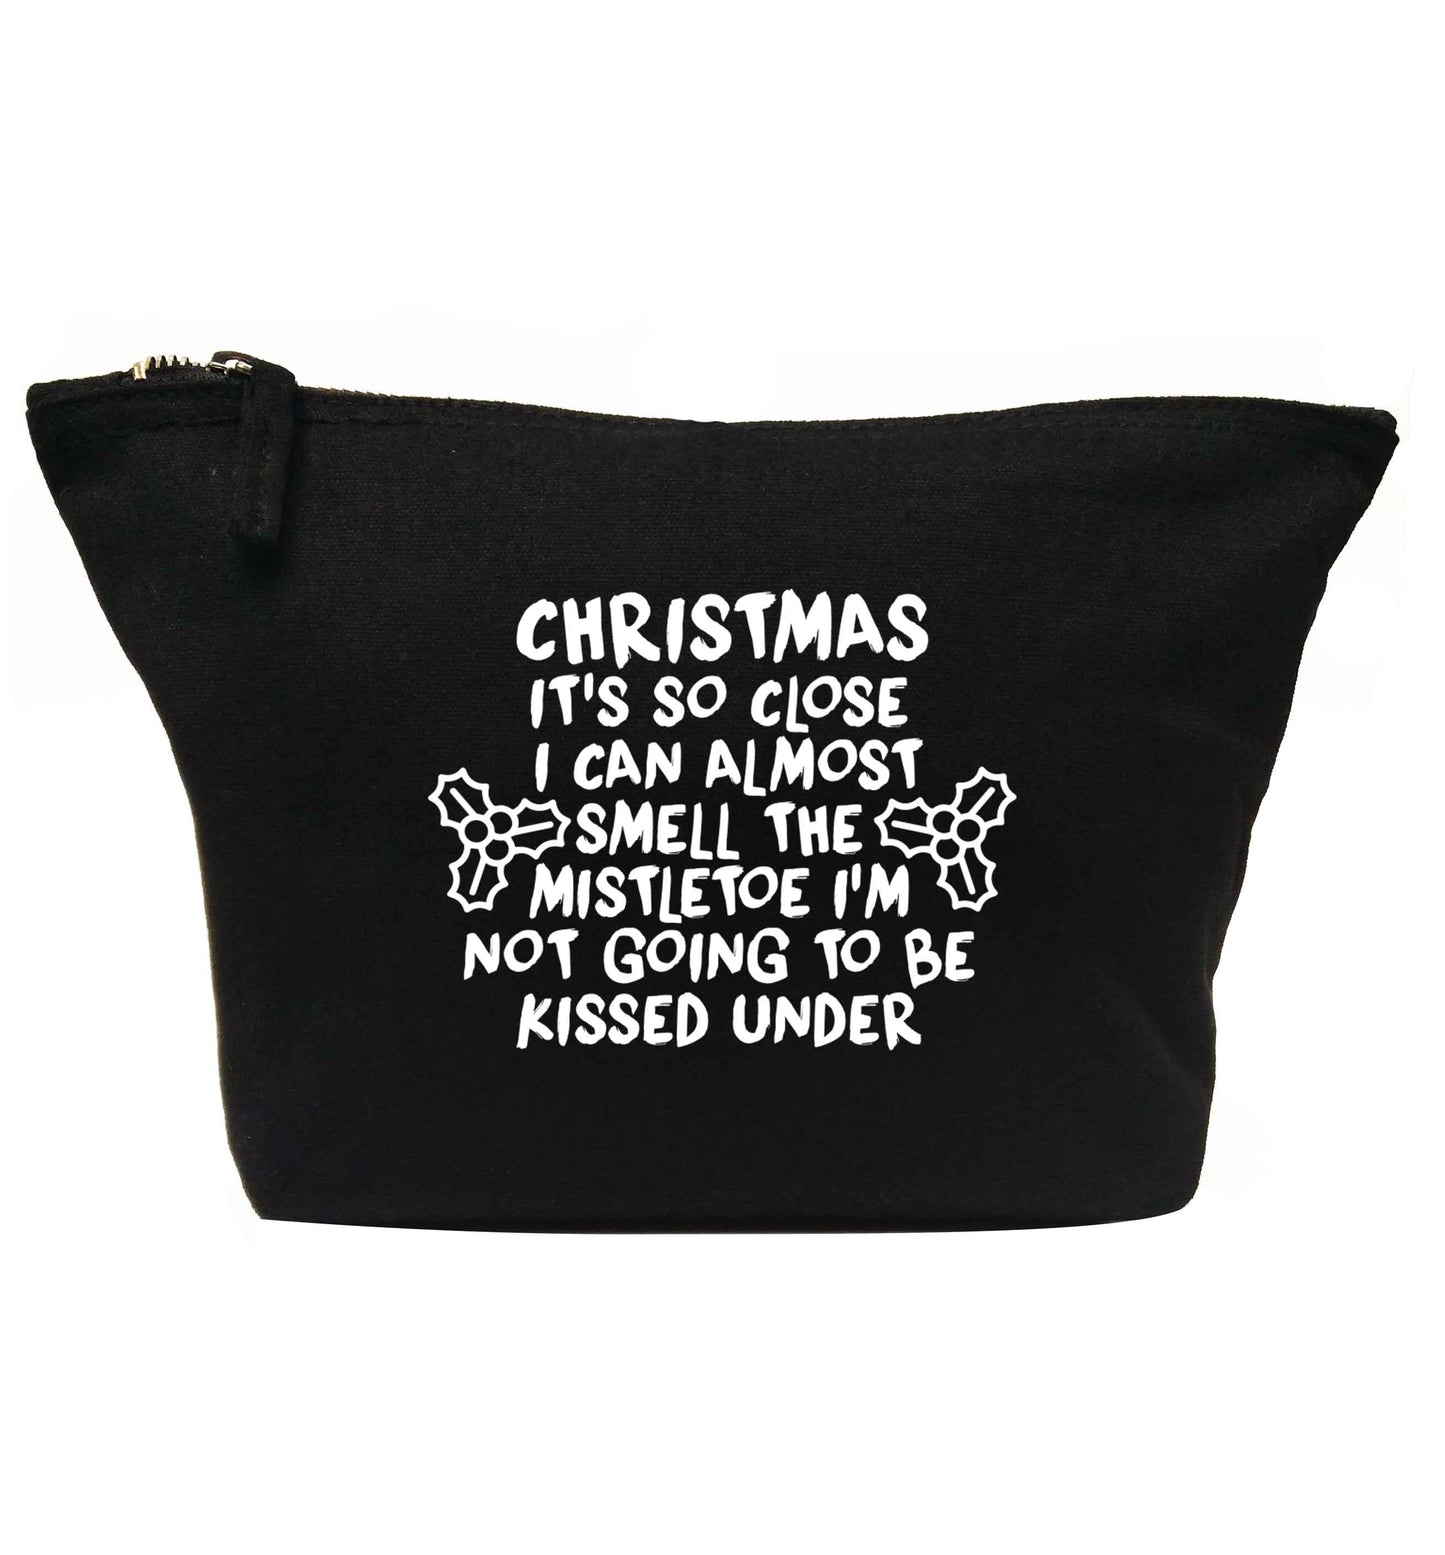 Christmas it's so close I can almost smell the misteltoe I'm not going to be kissed under | Makeup / wash bag